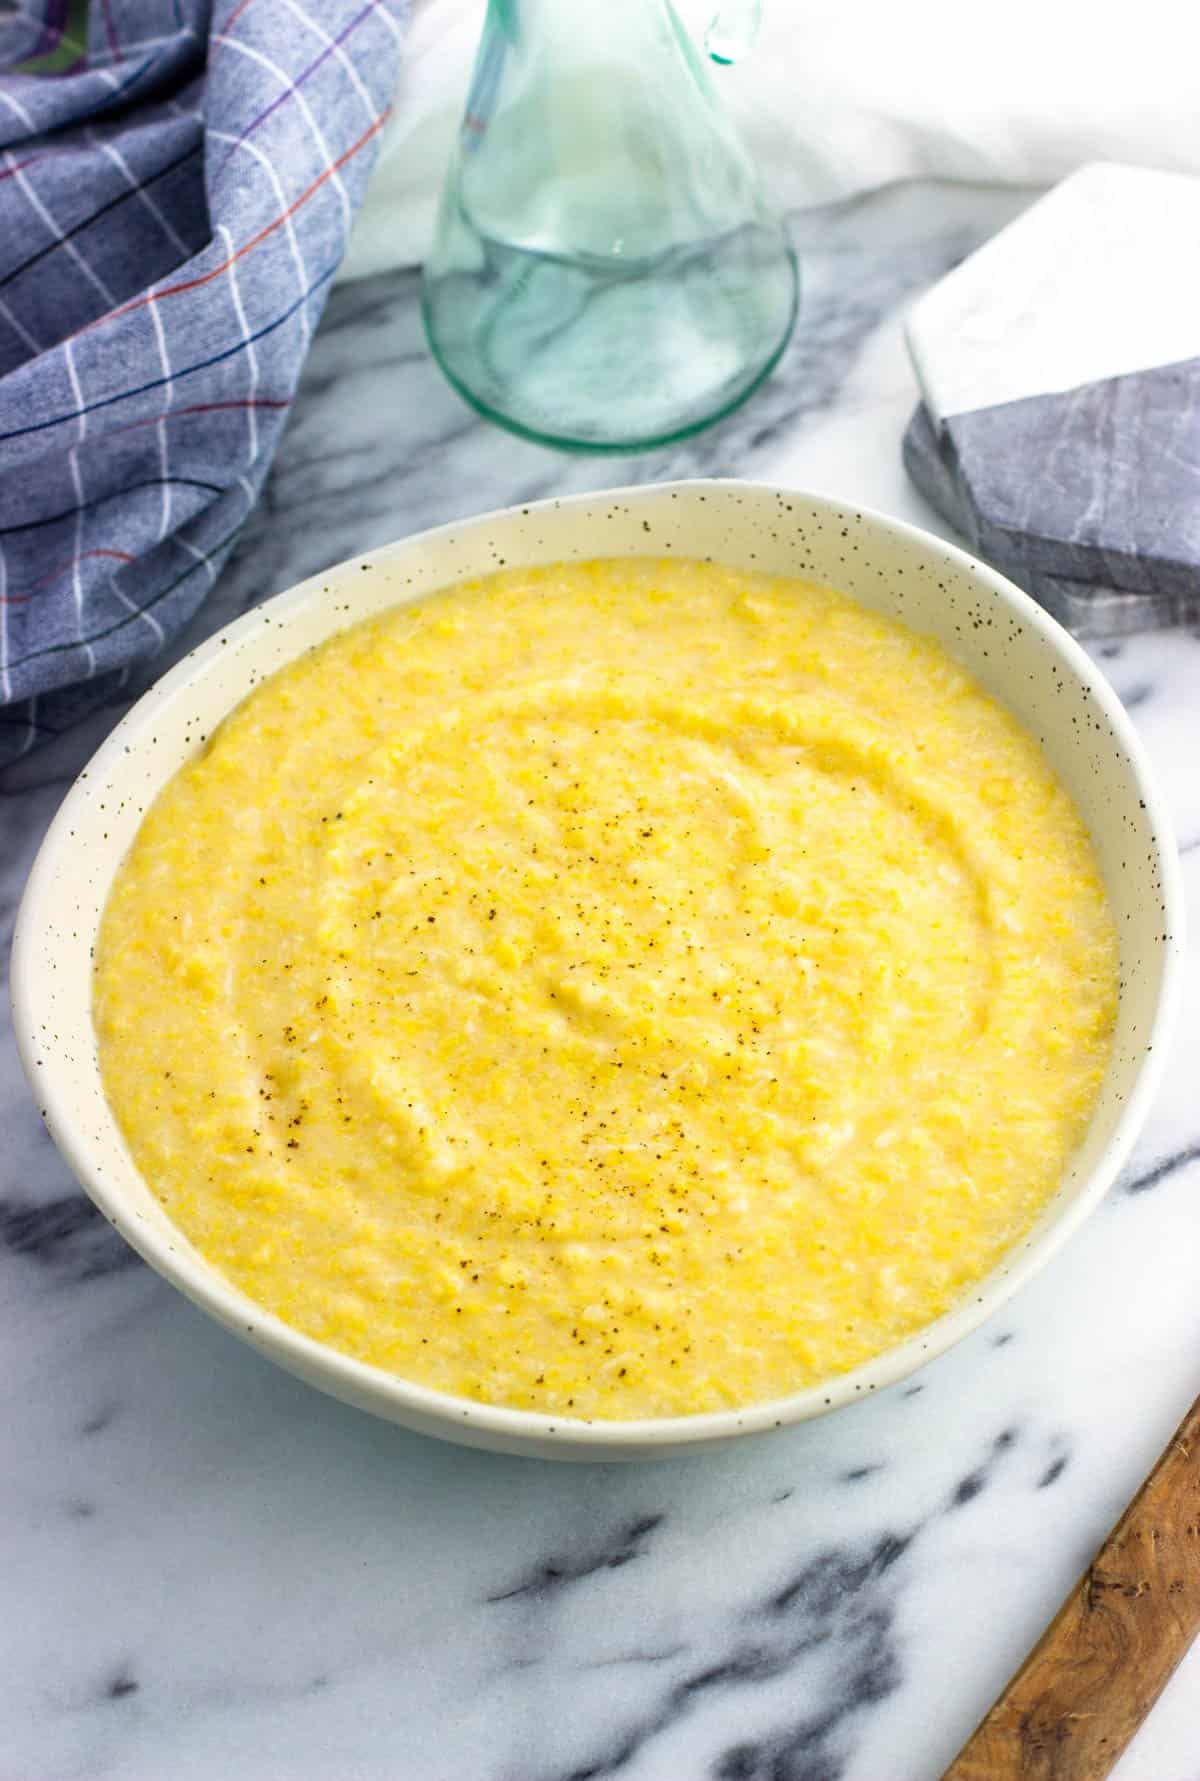 A serving bowl of easy creamy polenta made from a tube.